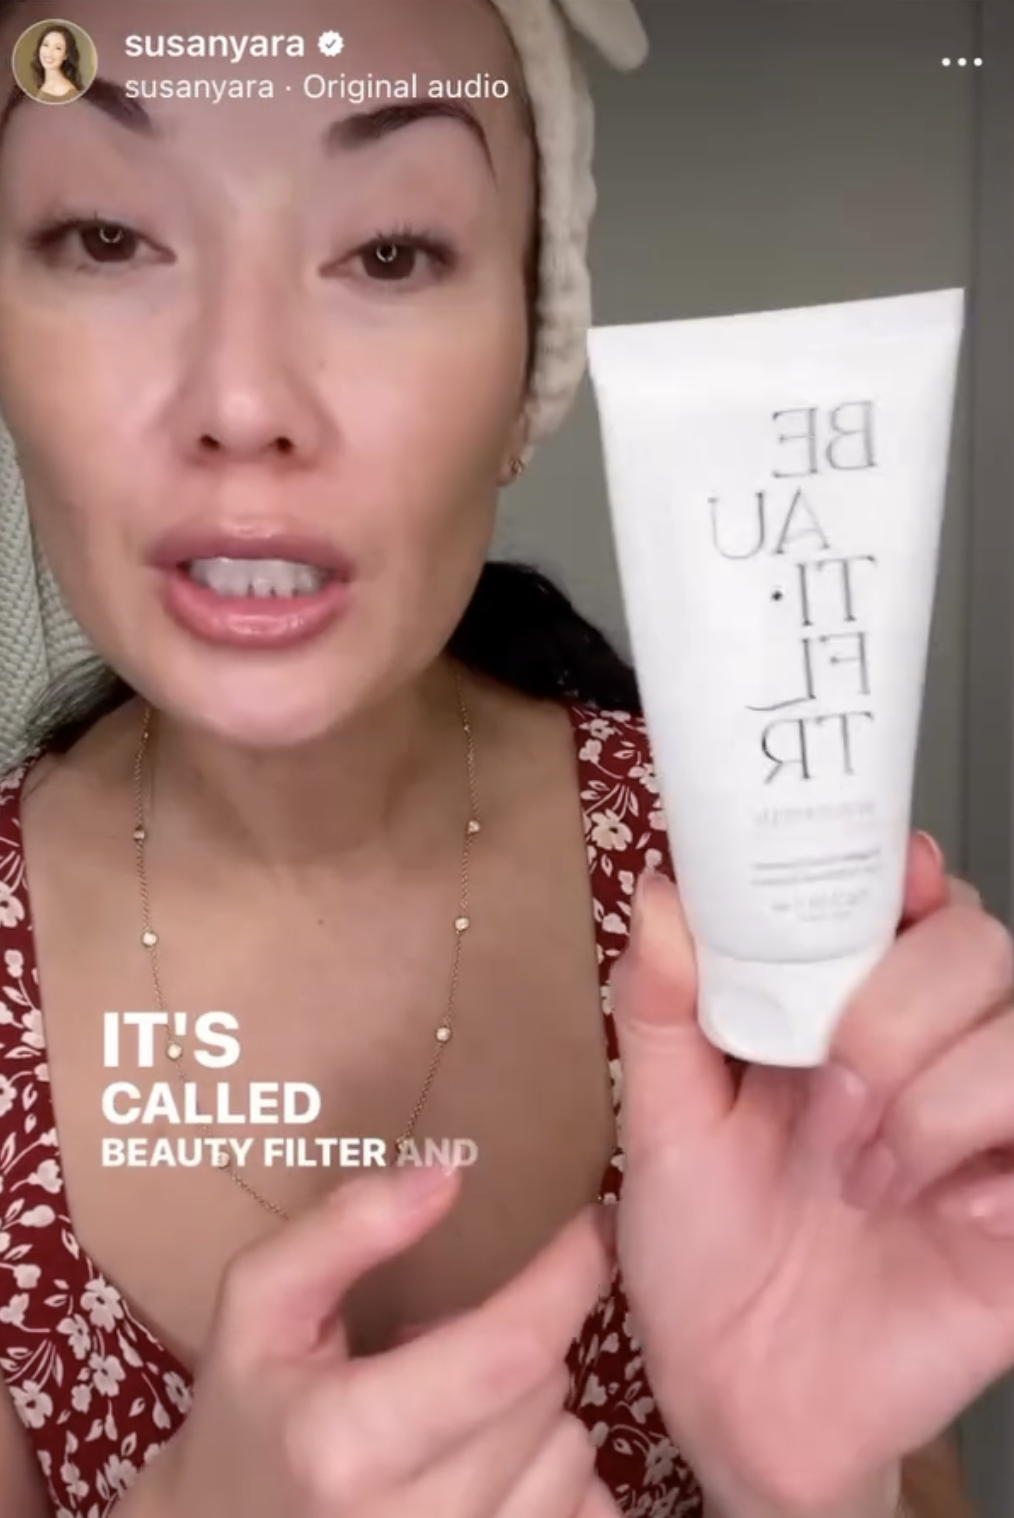 Woman showcasing a beauty product tube with text overlay &quot;IT&#x27;S CALLED BEAUTY FILTER AND&quot;